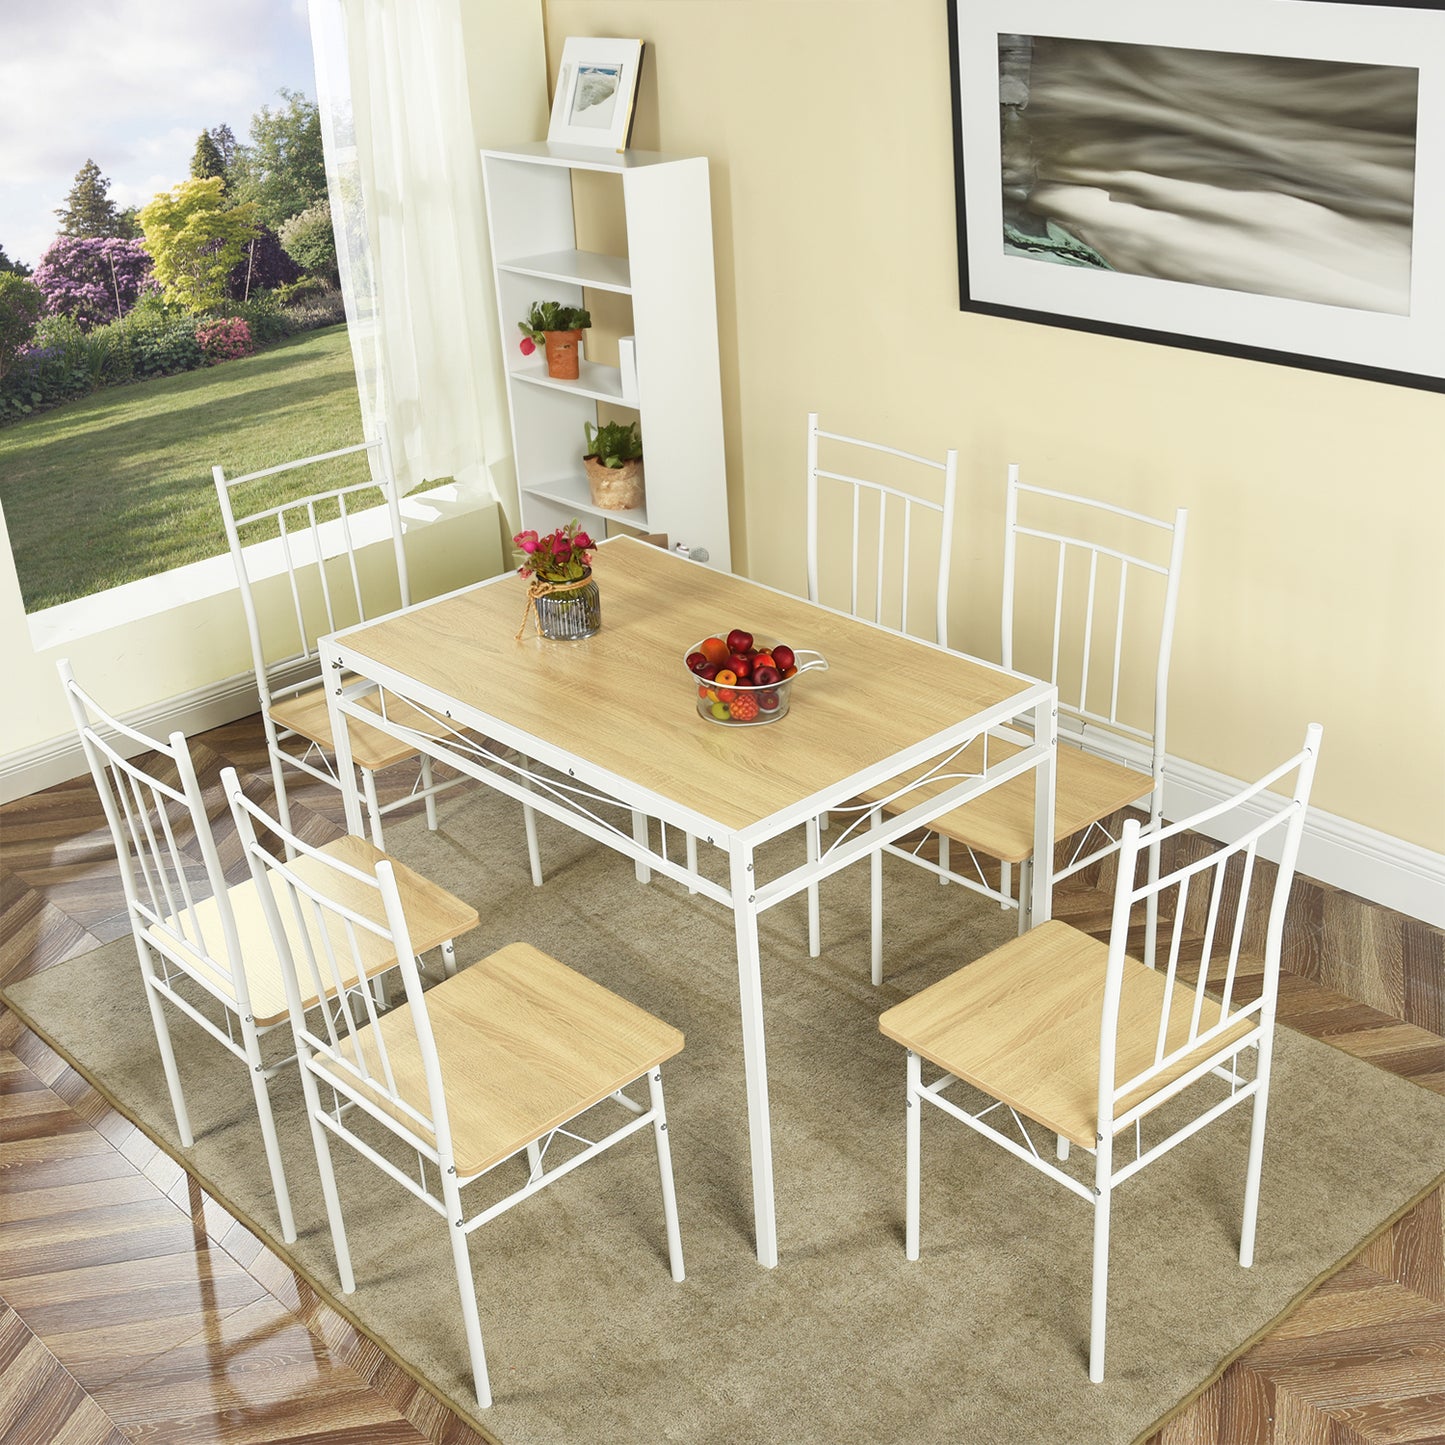 MARBURY 107cm Two Styles Dining Table With Iron Legs-Light Oak Grain and White Wood Grain